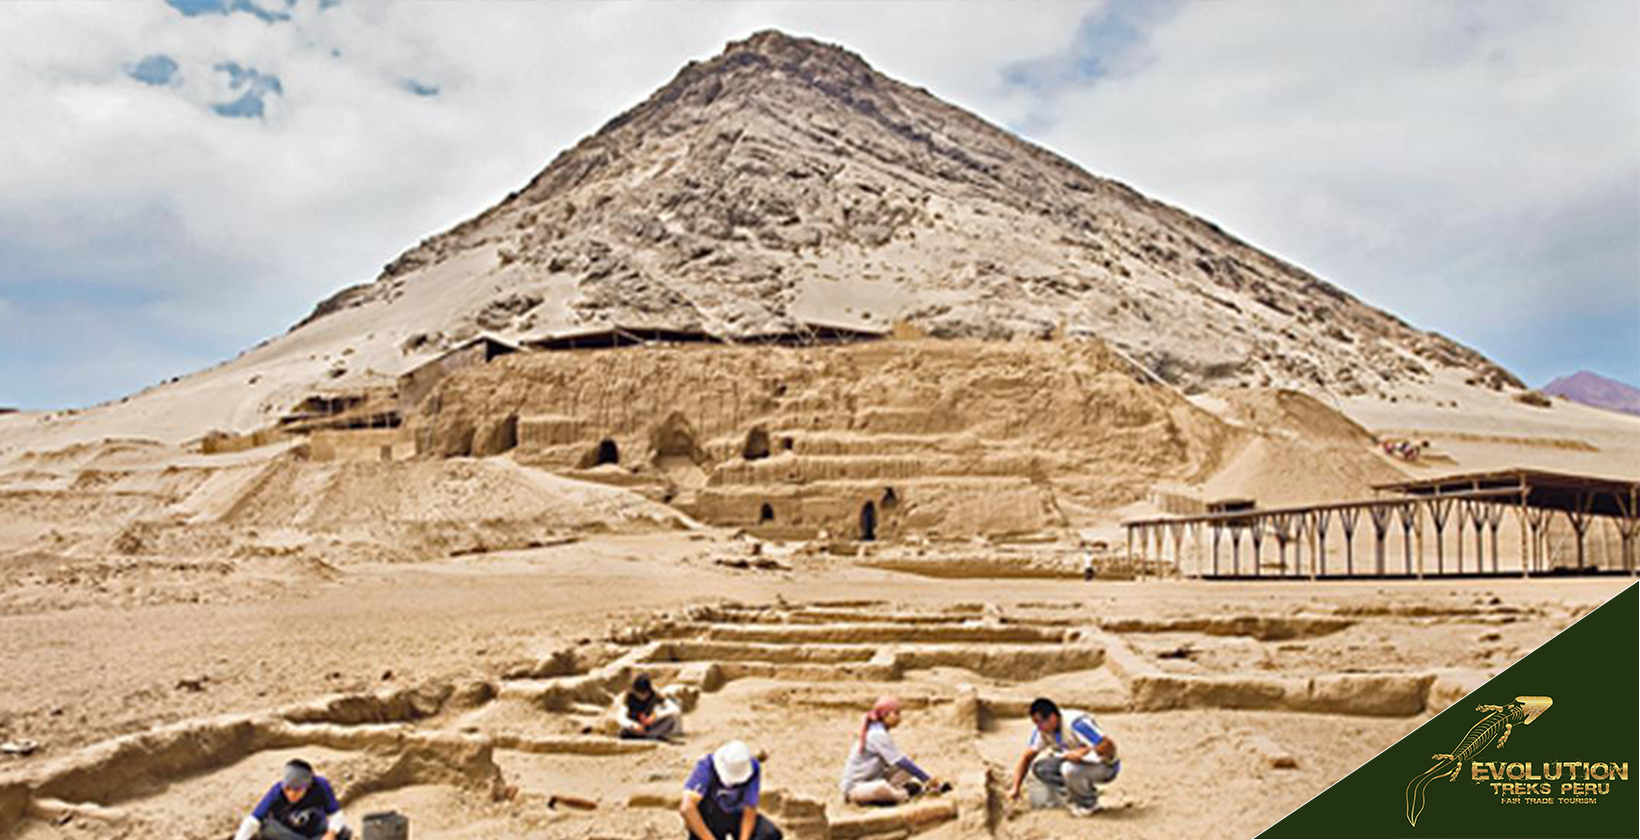 La Huaca del Sol Peru Guide: History, Hiking, Facts, Maps, and Tours